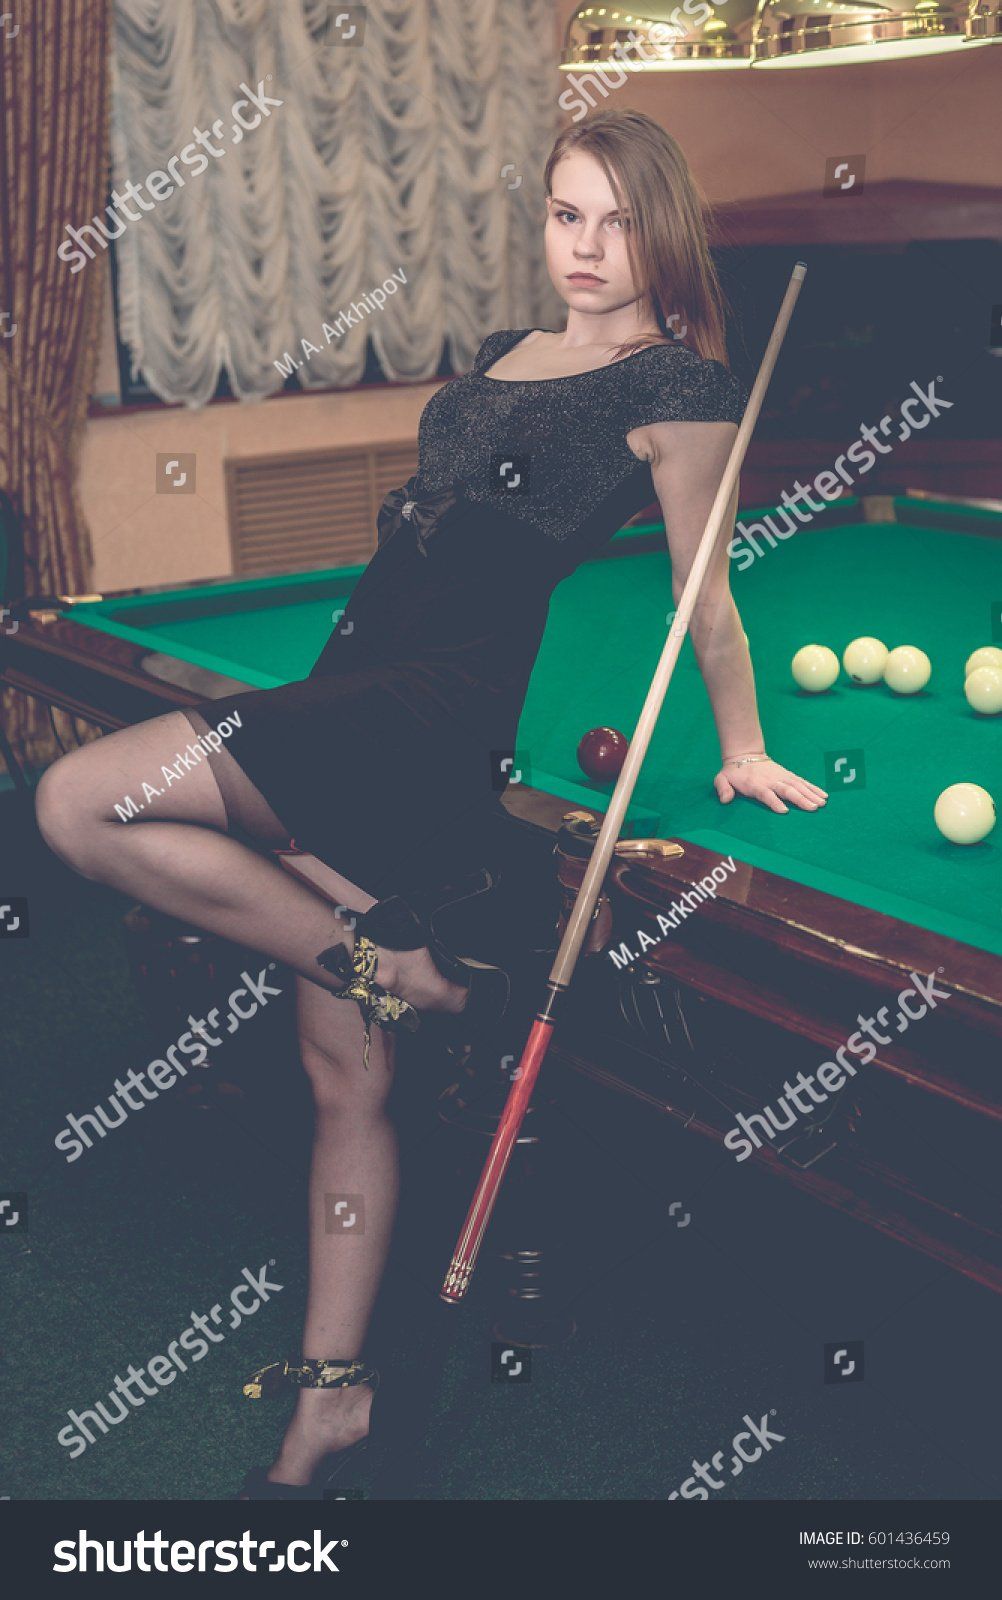 Sexy women playing pool pictures